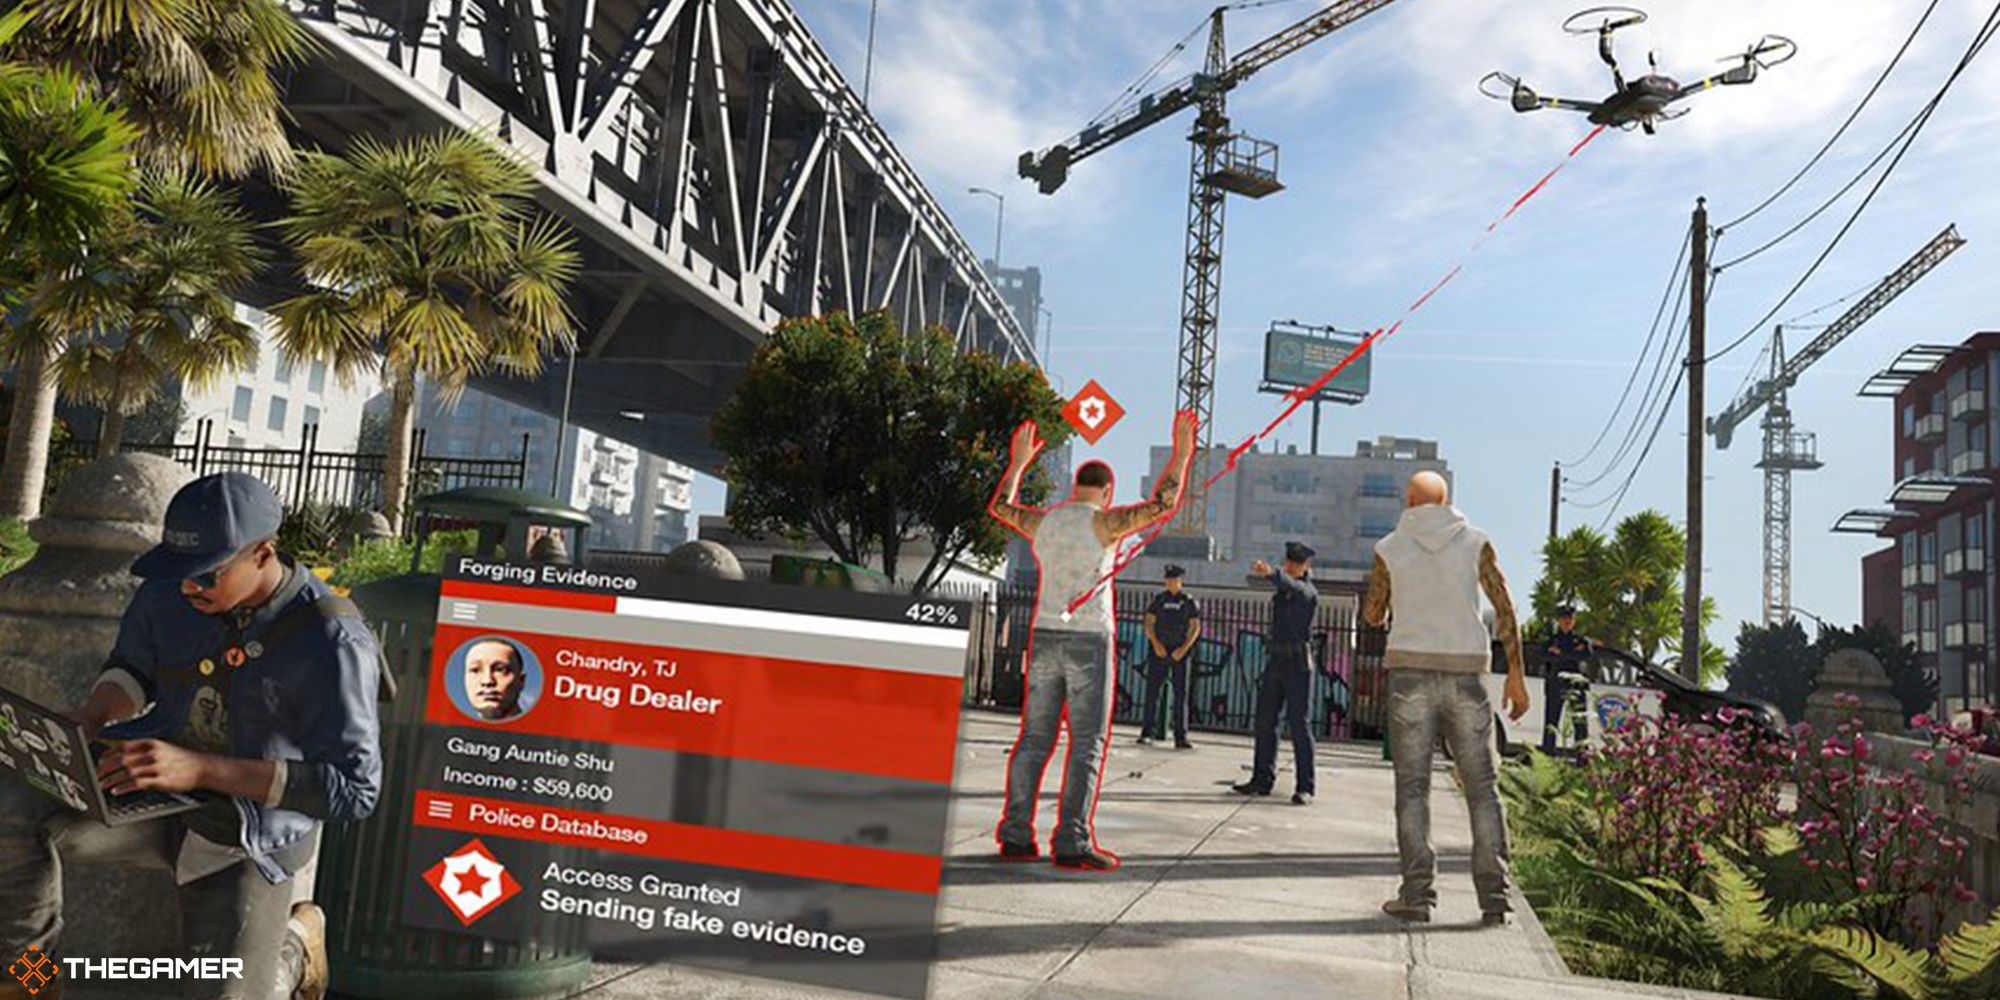 Watch Dogs 2 - planting fake evidence on someone